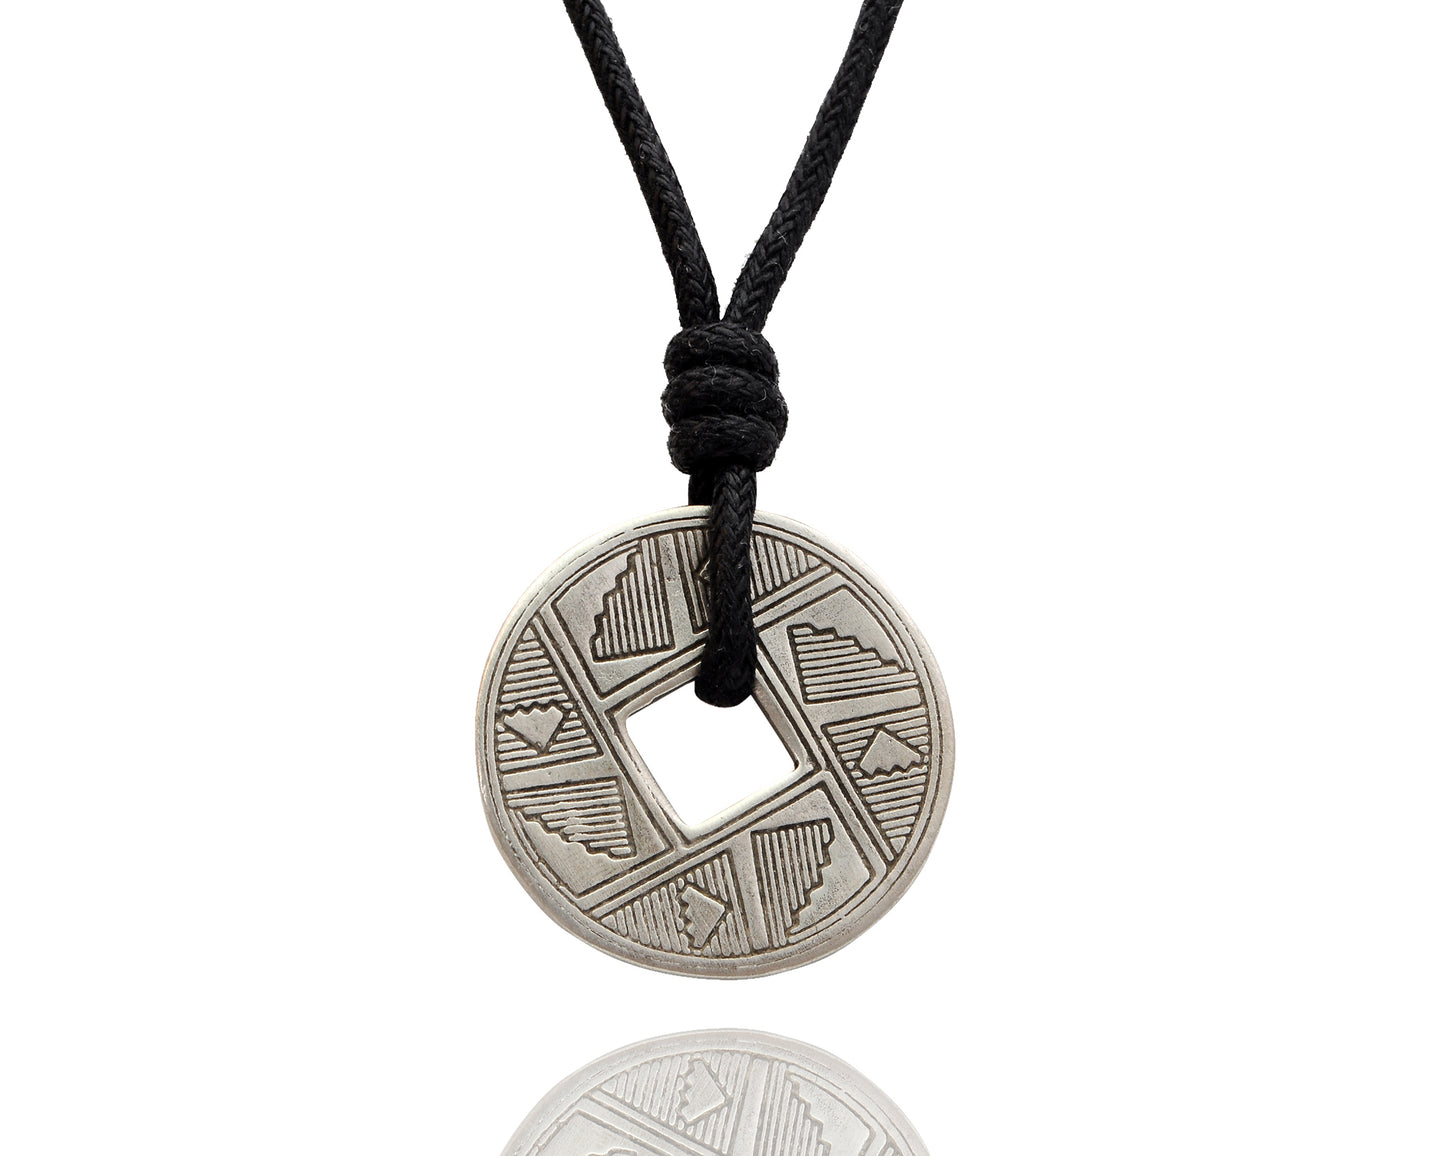 Chinese I Ching Coin Silver Pewter Charm Necklace Pendant Jewelry